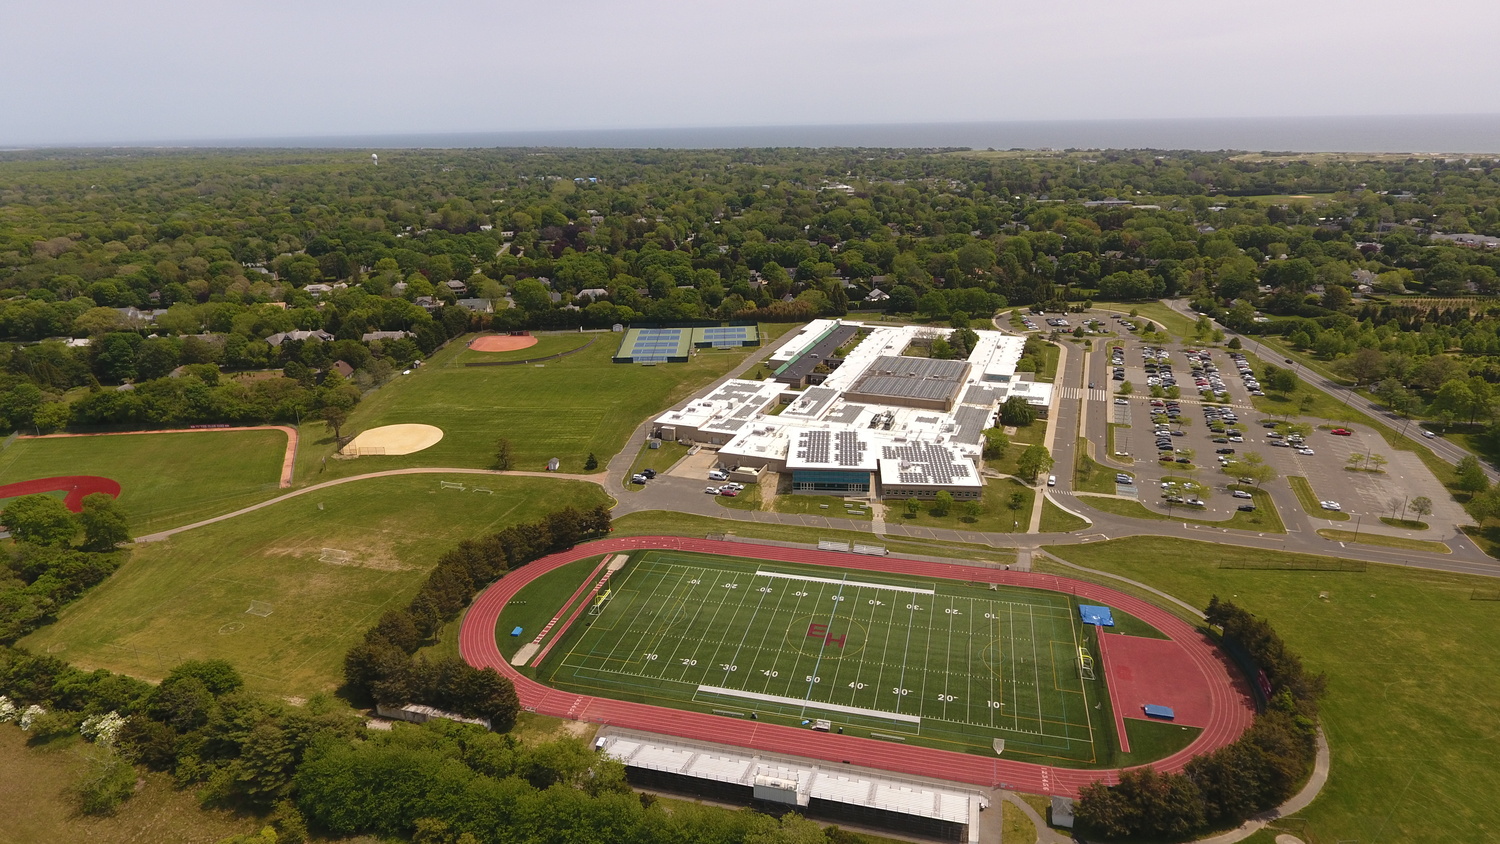 Solar panels were installed on the roofs of East Hampton School District buildings in 2020. MIKE WRIGHT